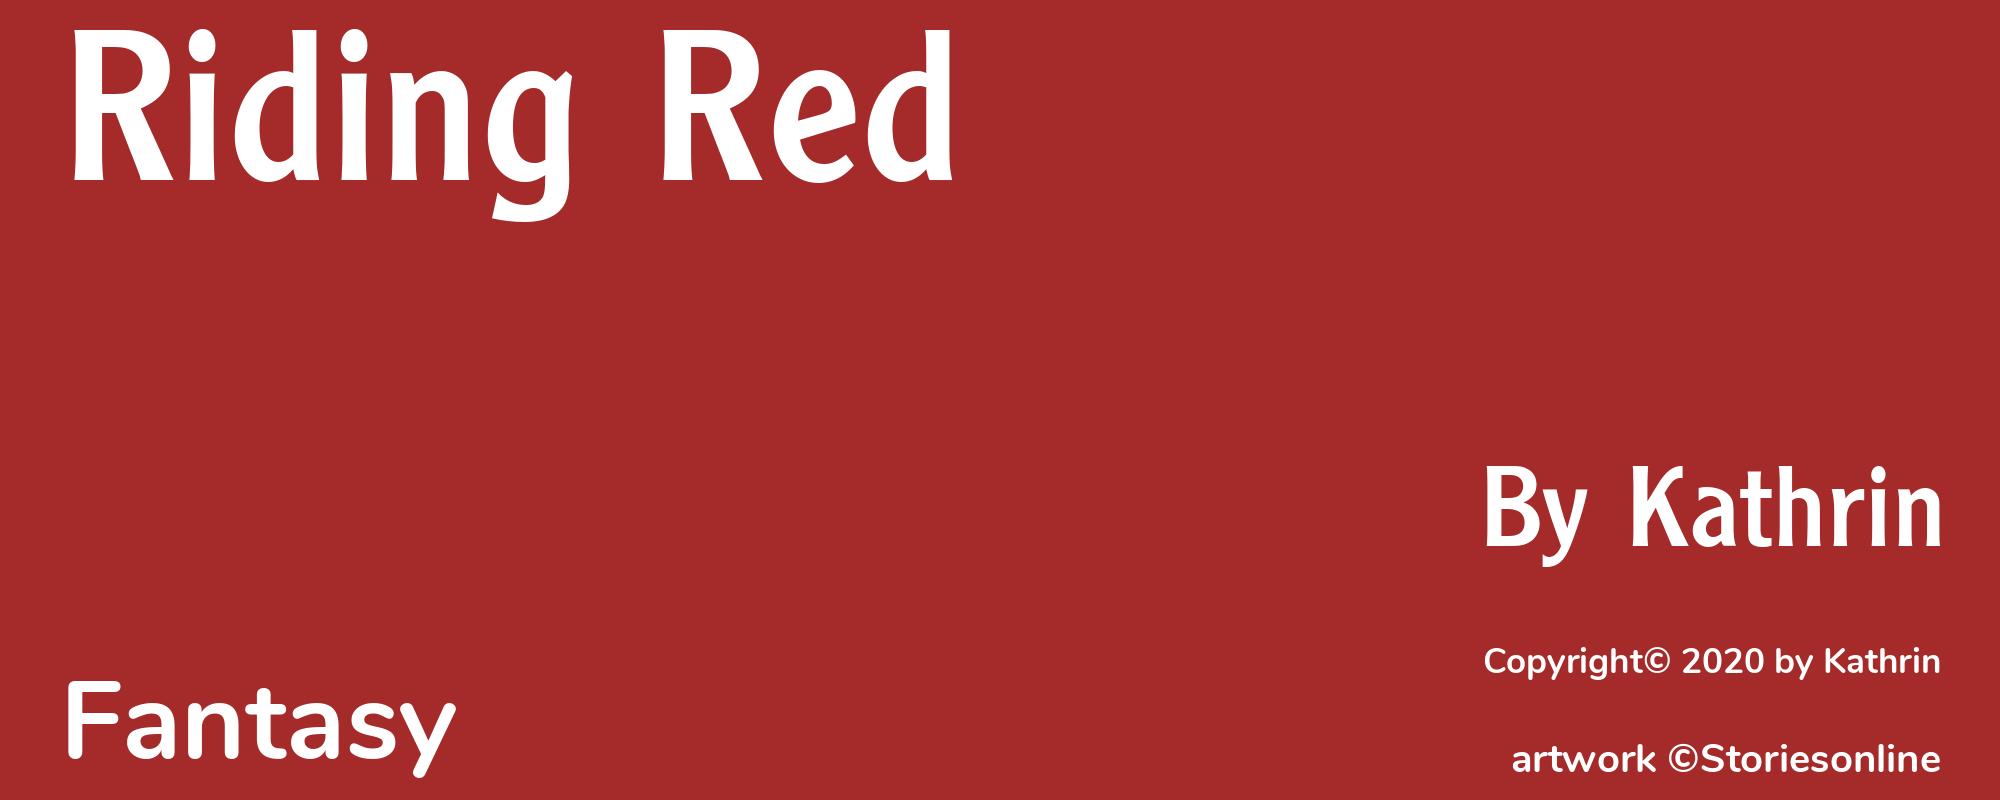 Riding Red - Cover